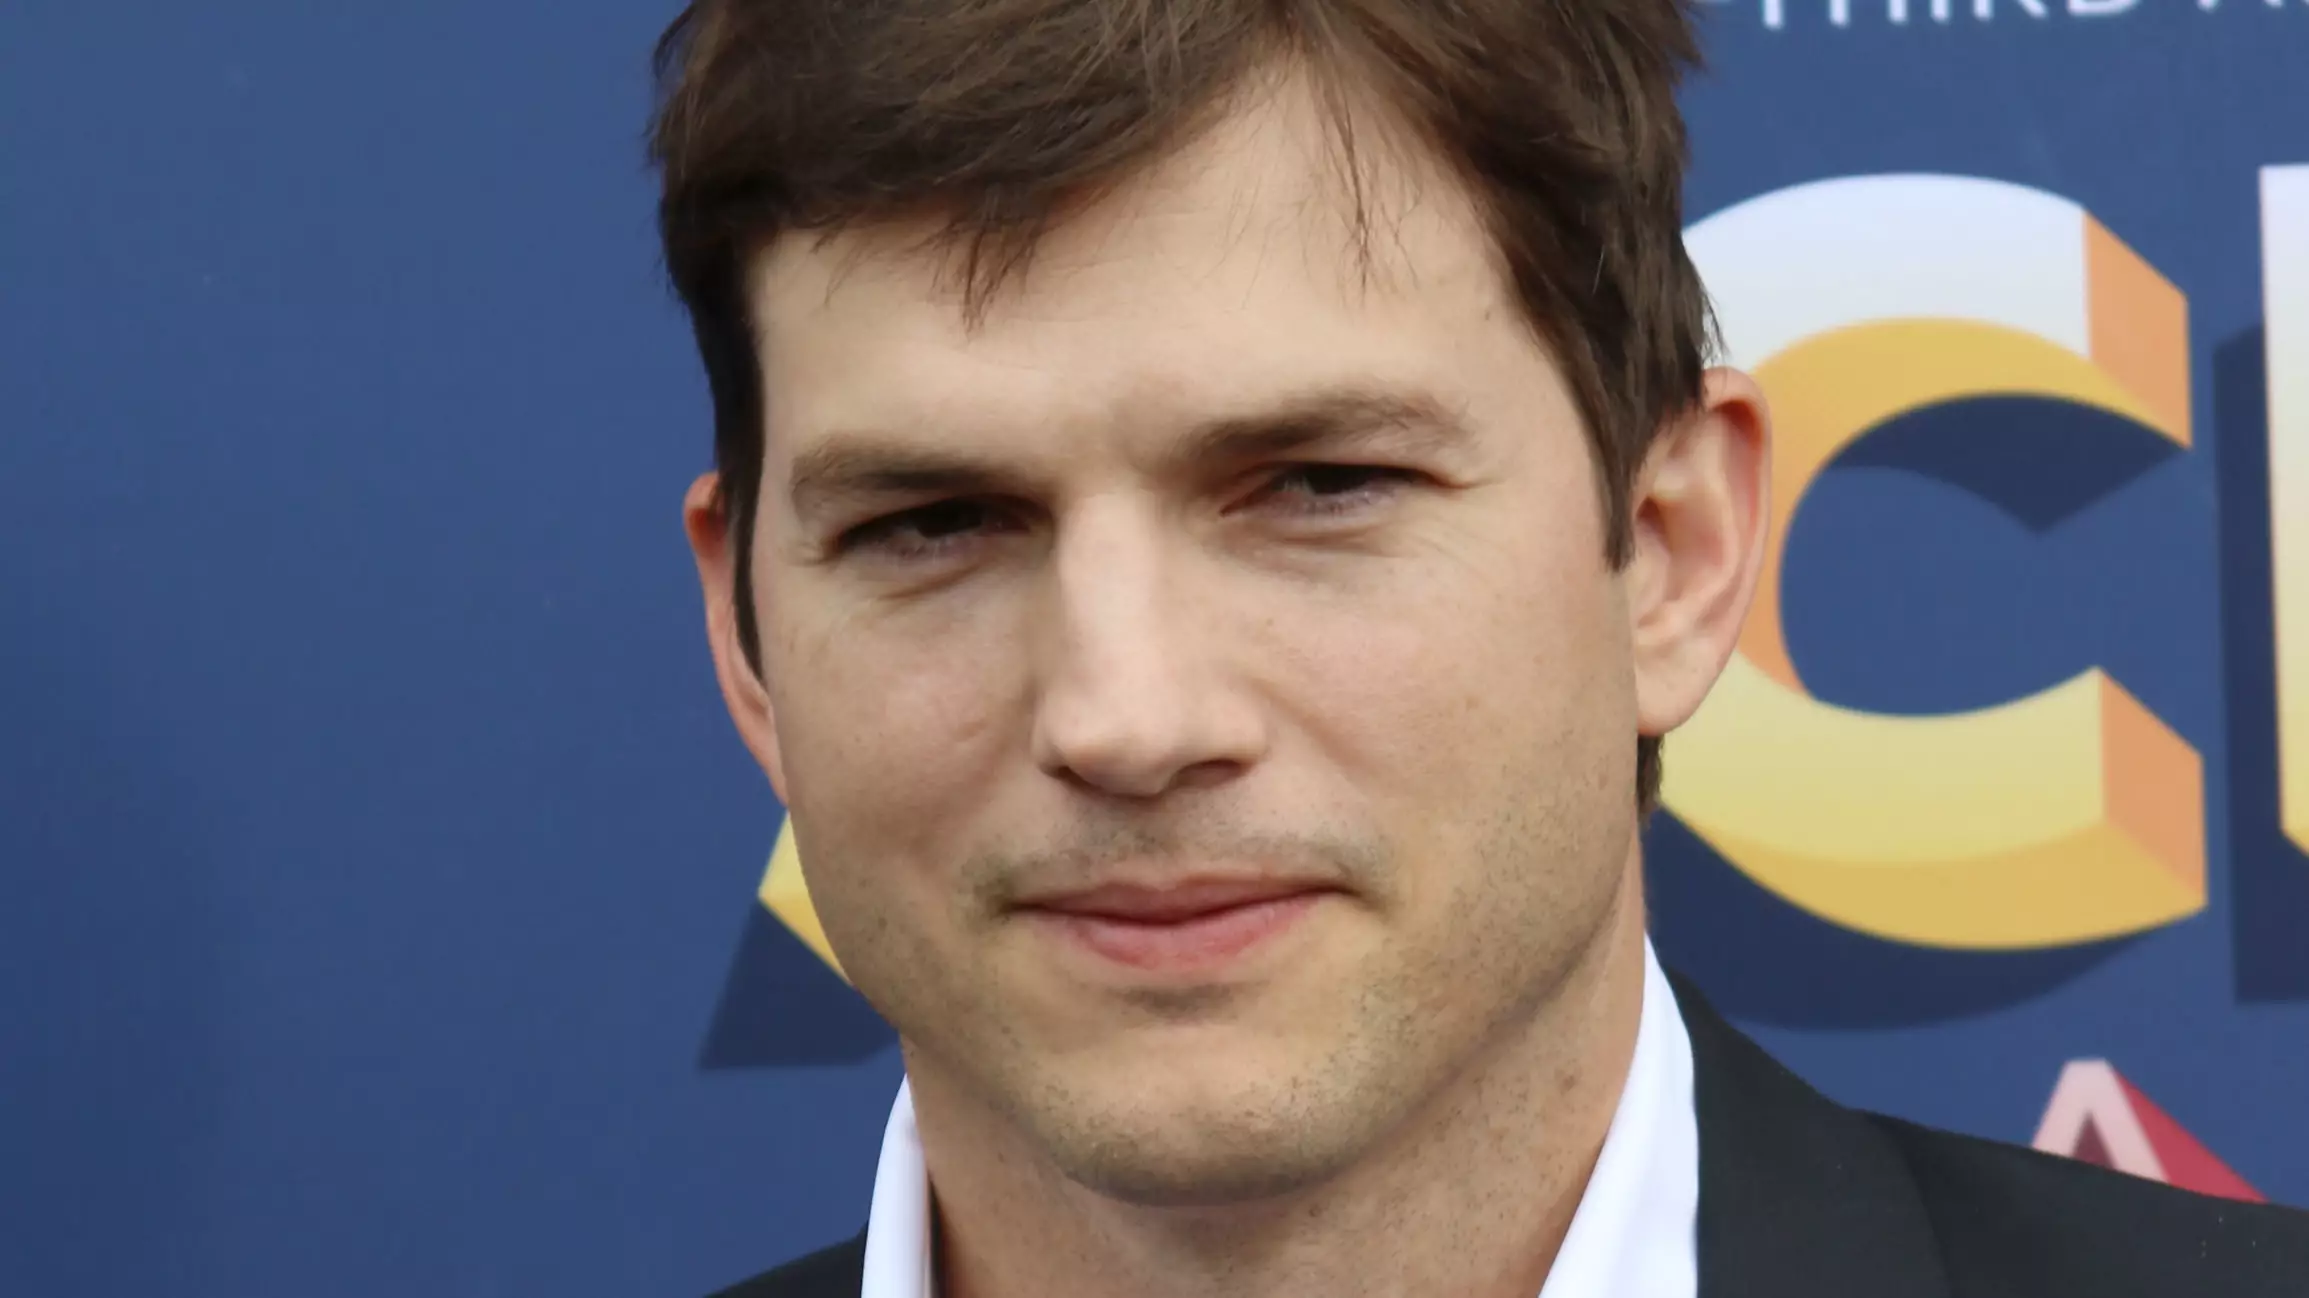 Ashton Kutcher Is Out Here Tweeting His Phone Number So You Can Text Him